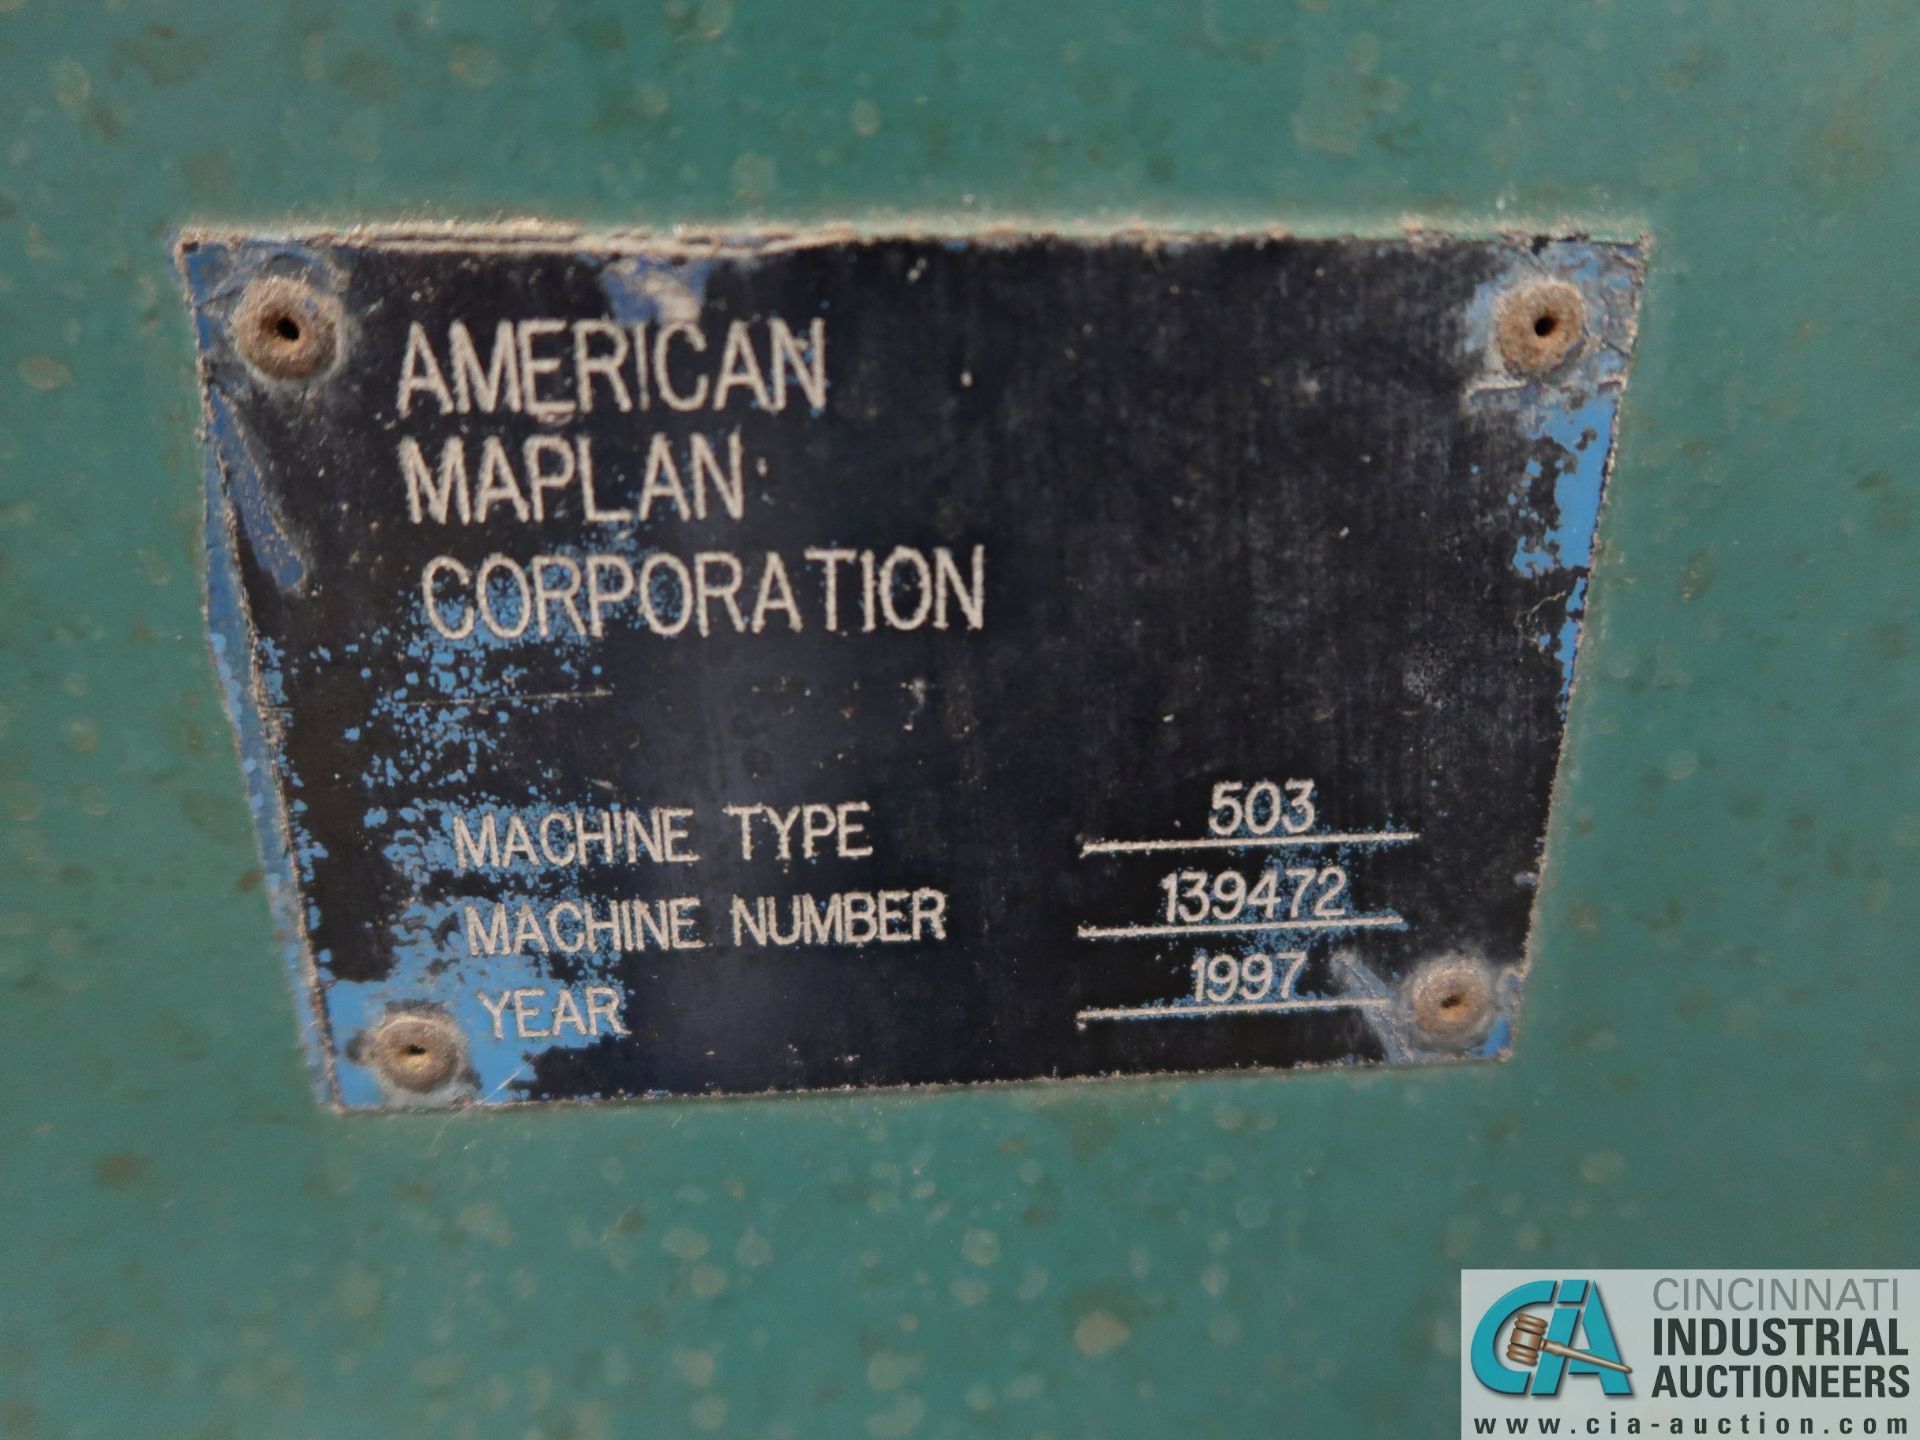 AMERICAN MAPLAN MODEL 503 PULLER; S/N 139472 (NEW 1997), 8" WIDE PULLER PADS WITH (1) SKID GEAR - Image 10 of 21